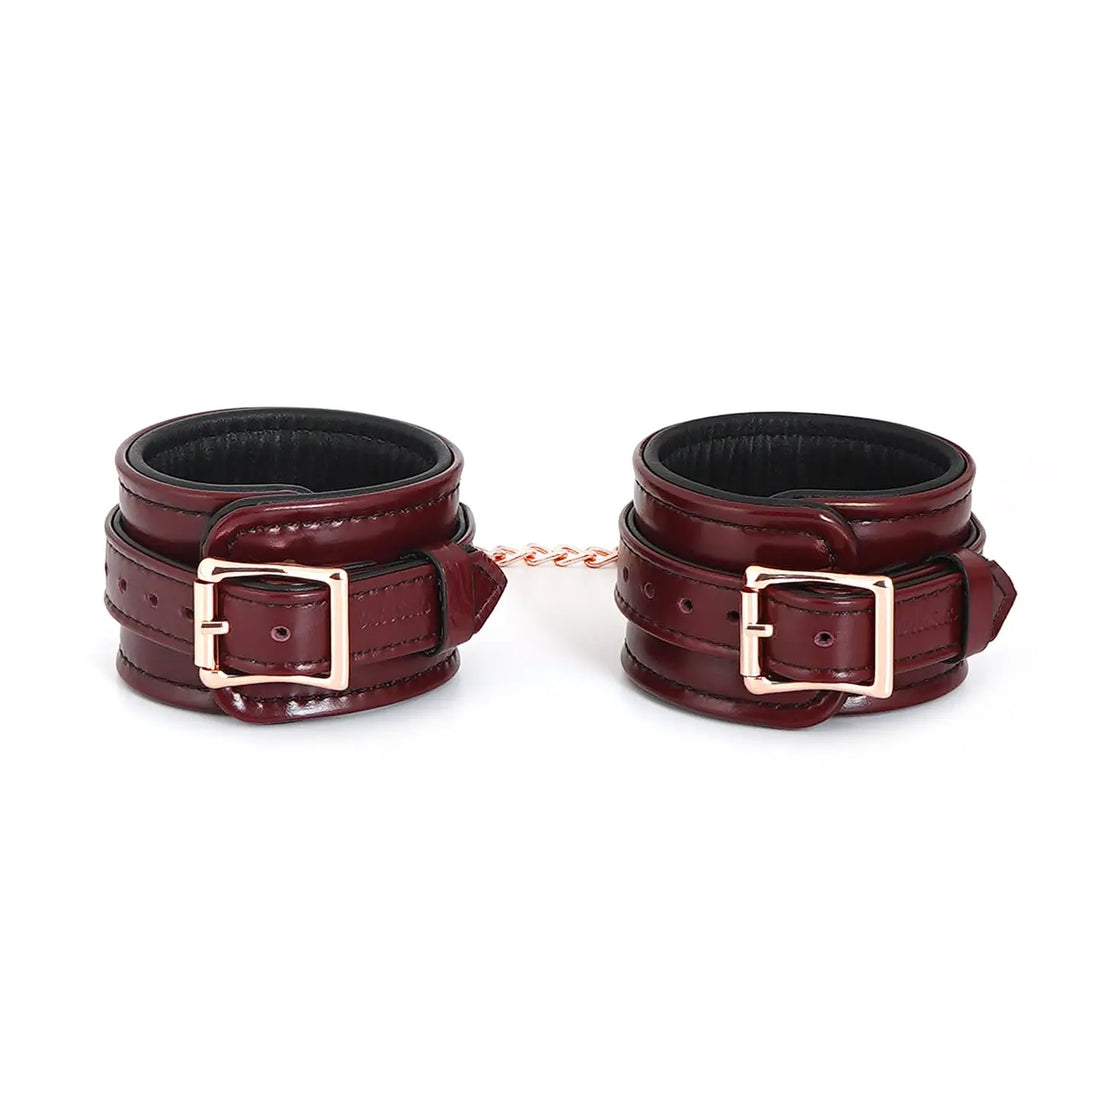 ANON SECRETS - WINE RED LEATHER ANKLE CUFFS